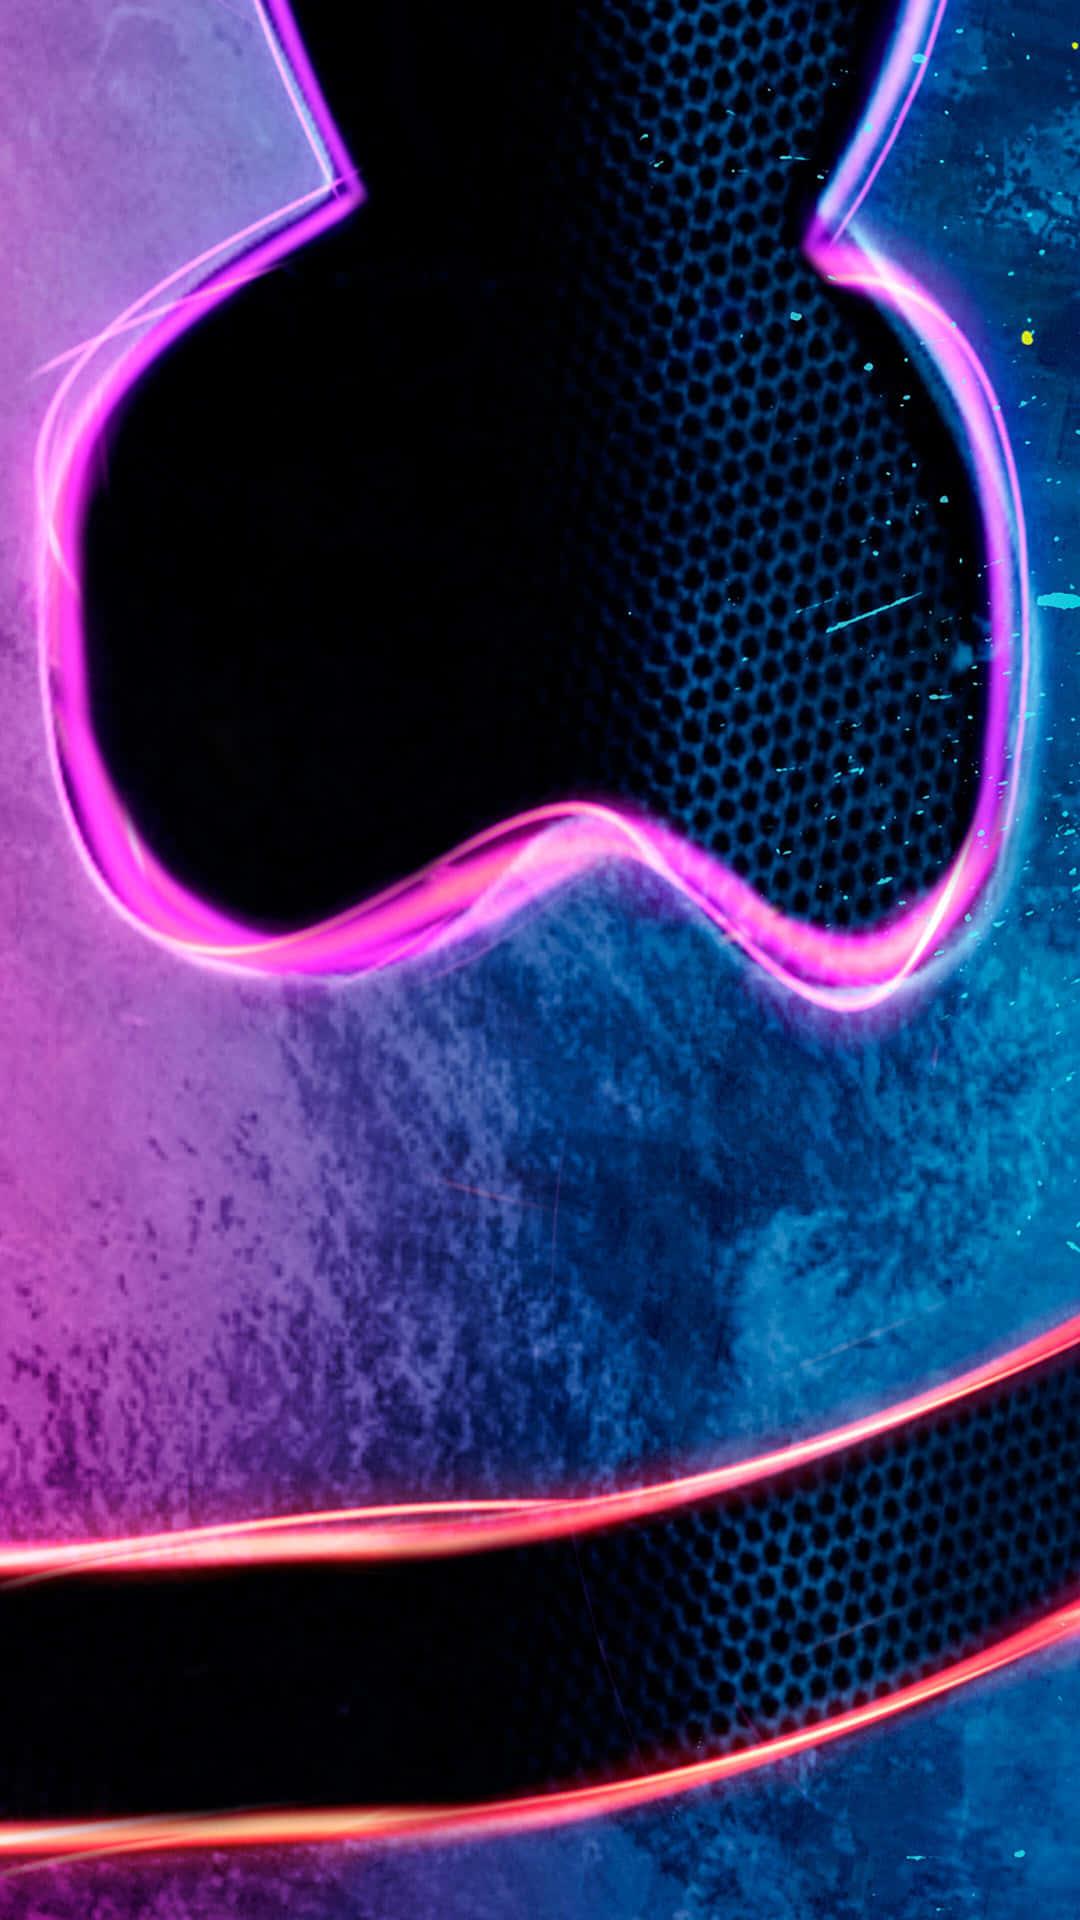 Get a bright new look with the Marshmallo Neon iPhone Wallpaper